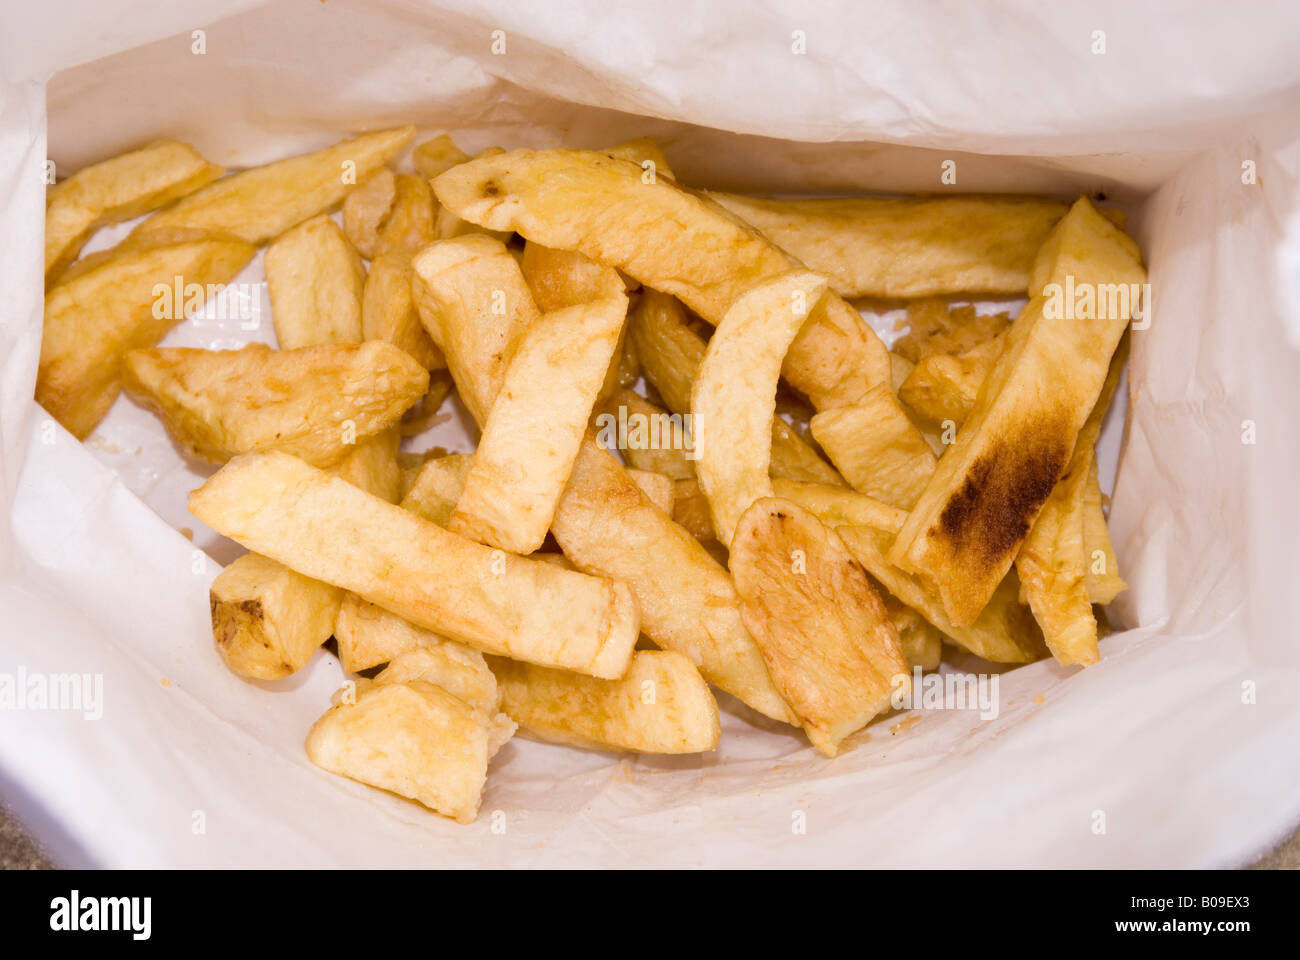 A portion of chips to take away in the uk Stock Photo